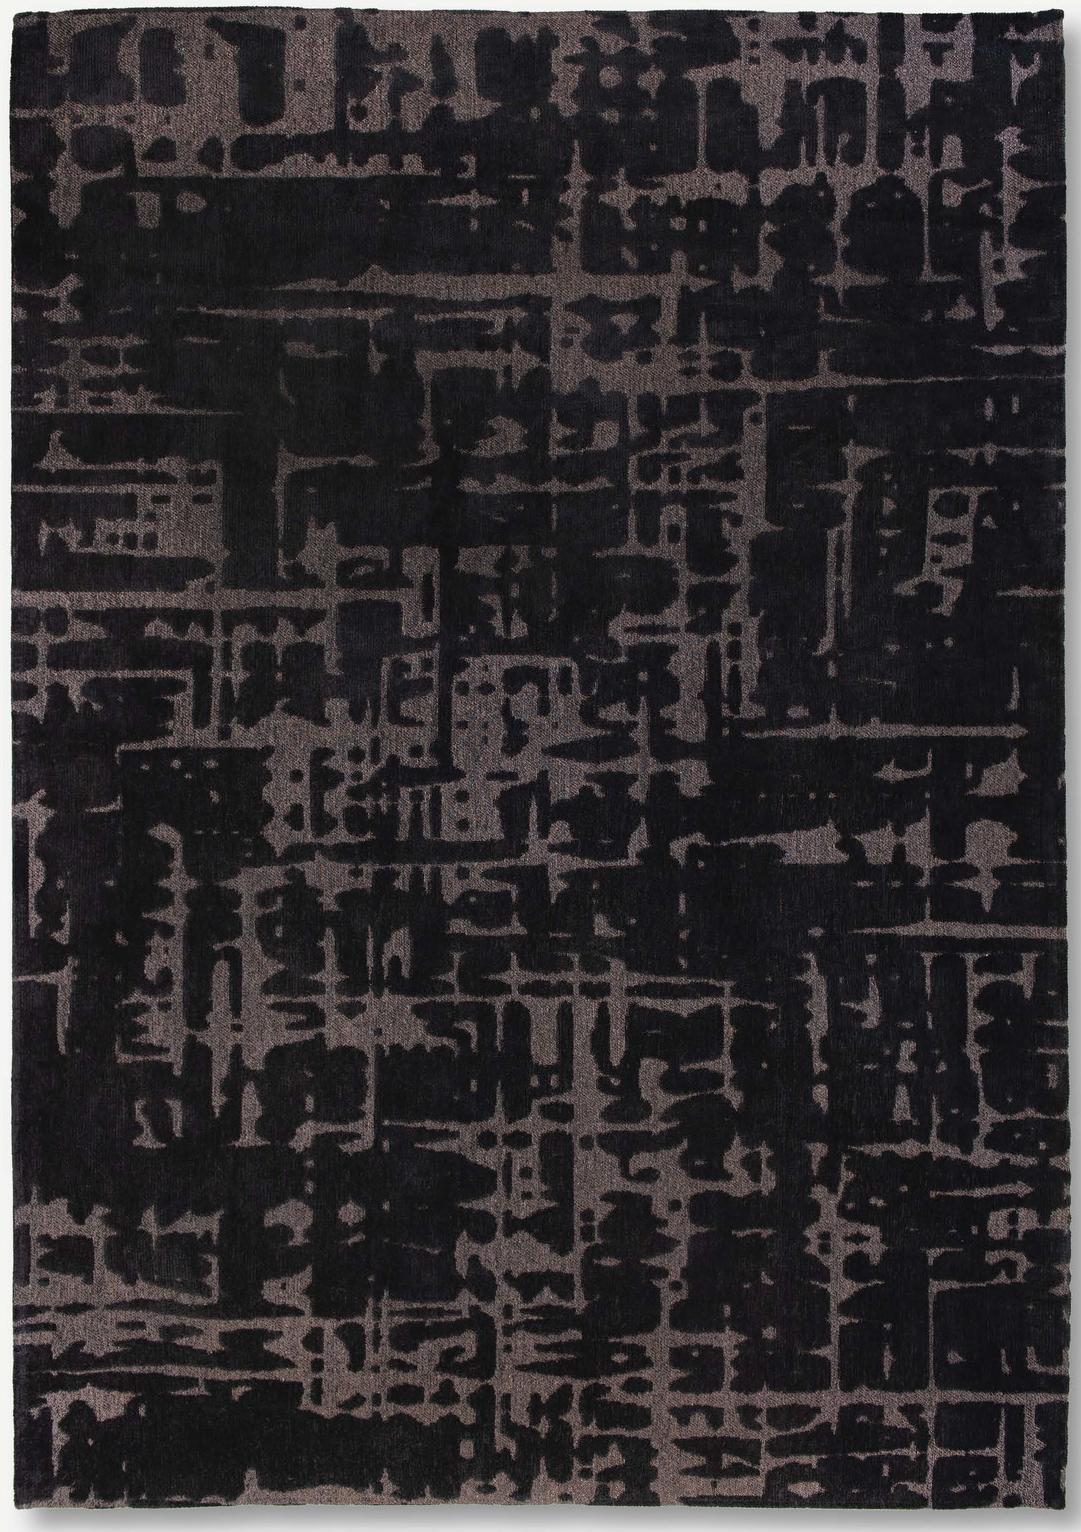 Abstract Black Belgian Rug ☞ Size: 2' 7" x 8' 2" (80 x 250 cm)